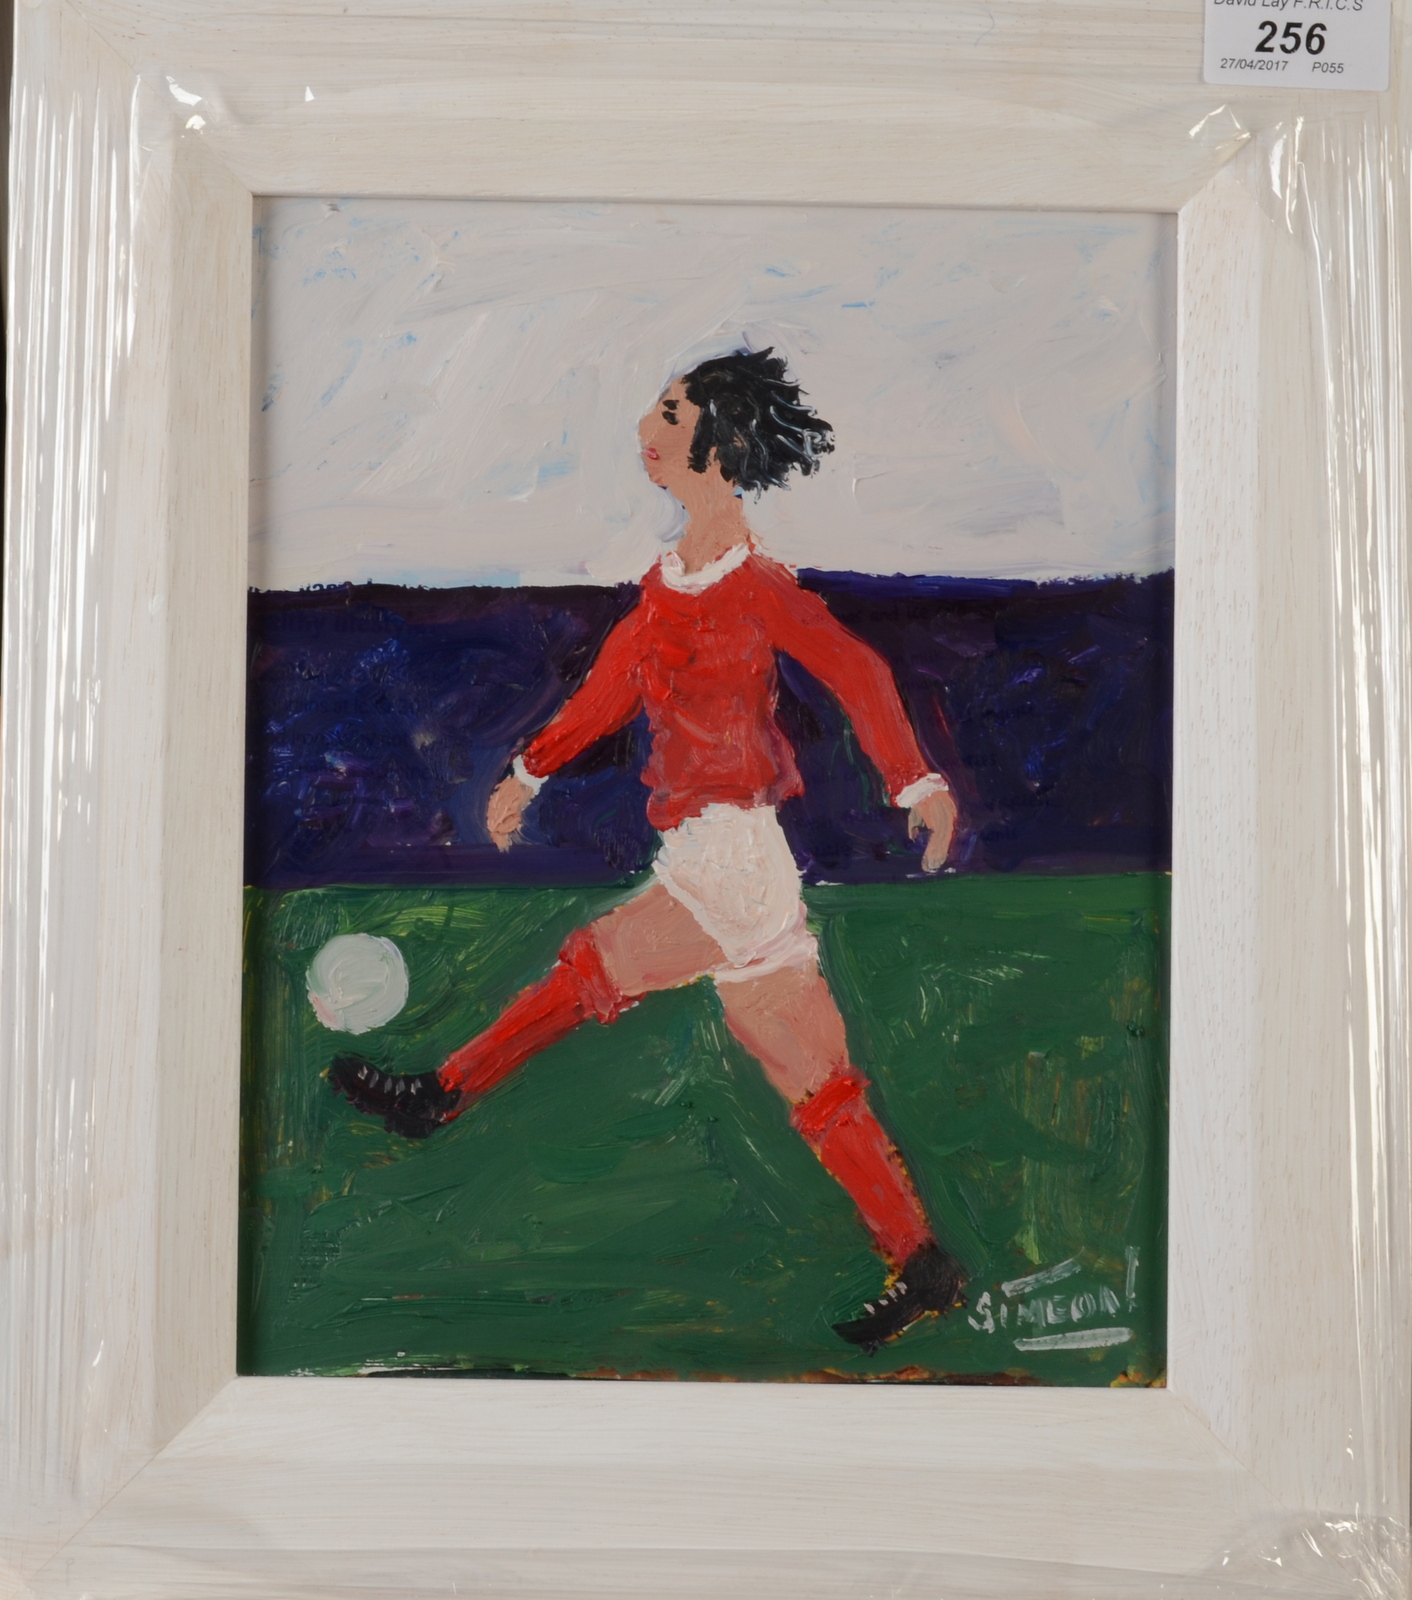 SIMEON STAFFORD George Best Oil on board Signed Titled and dated on the back 2009 26 x 20cm - Image 2 of 2